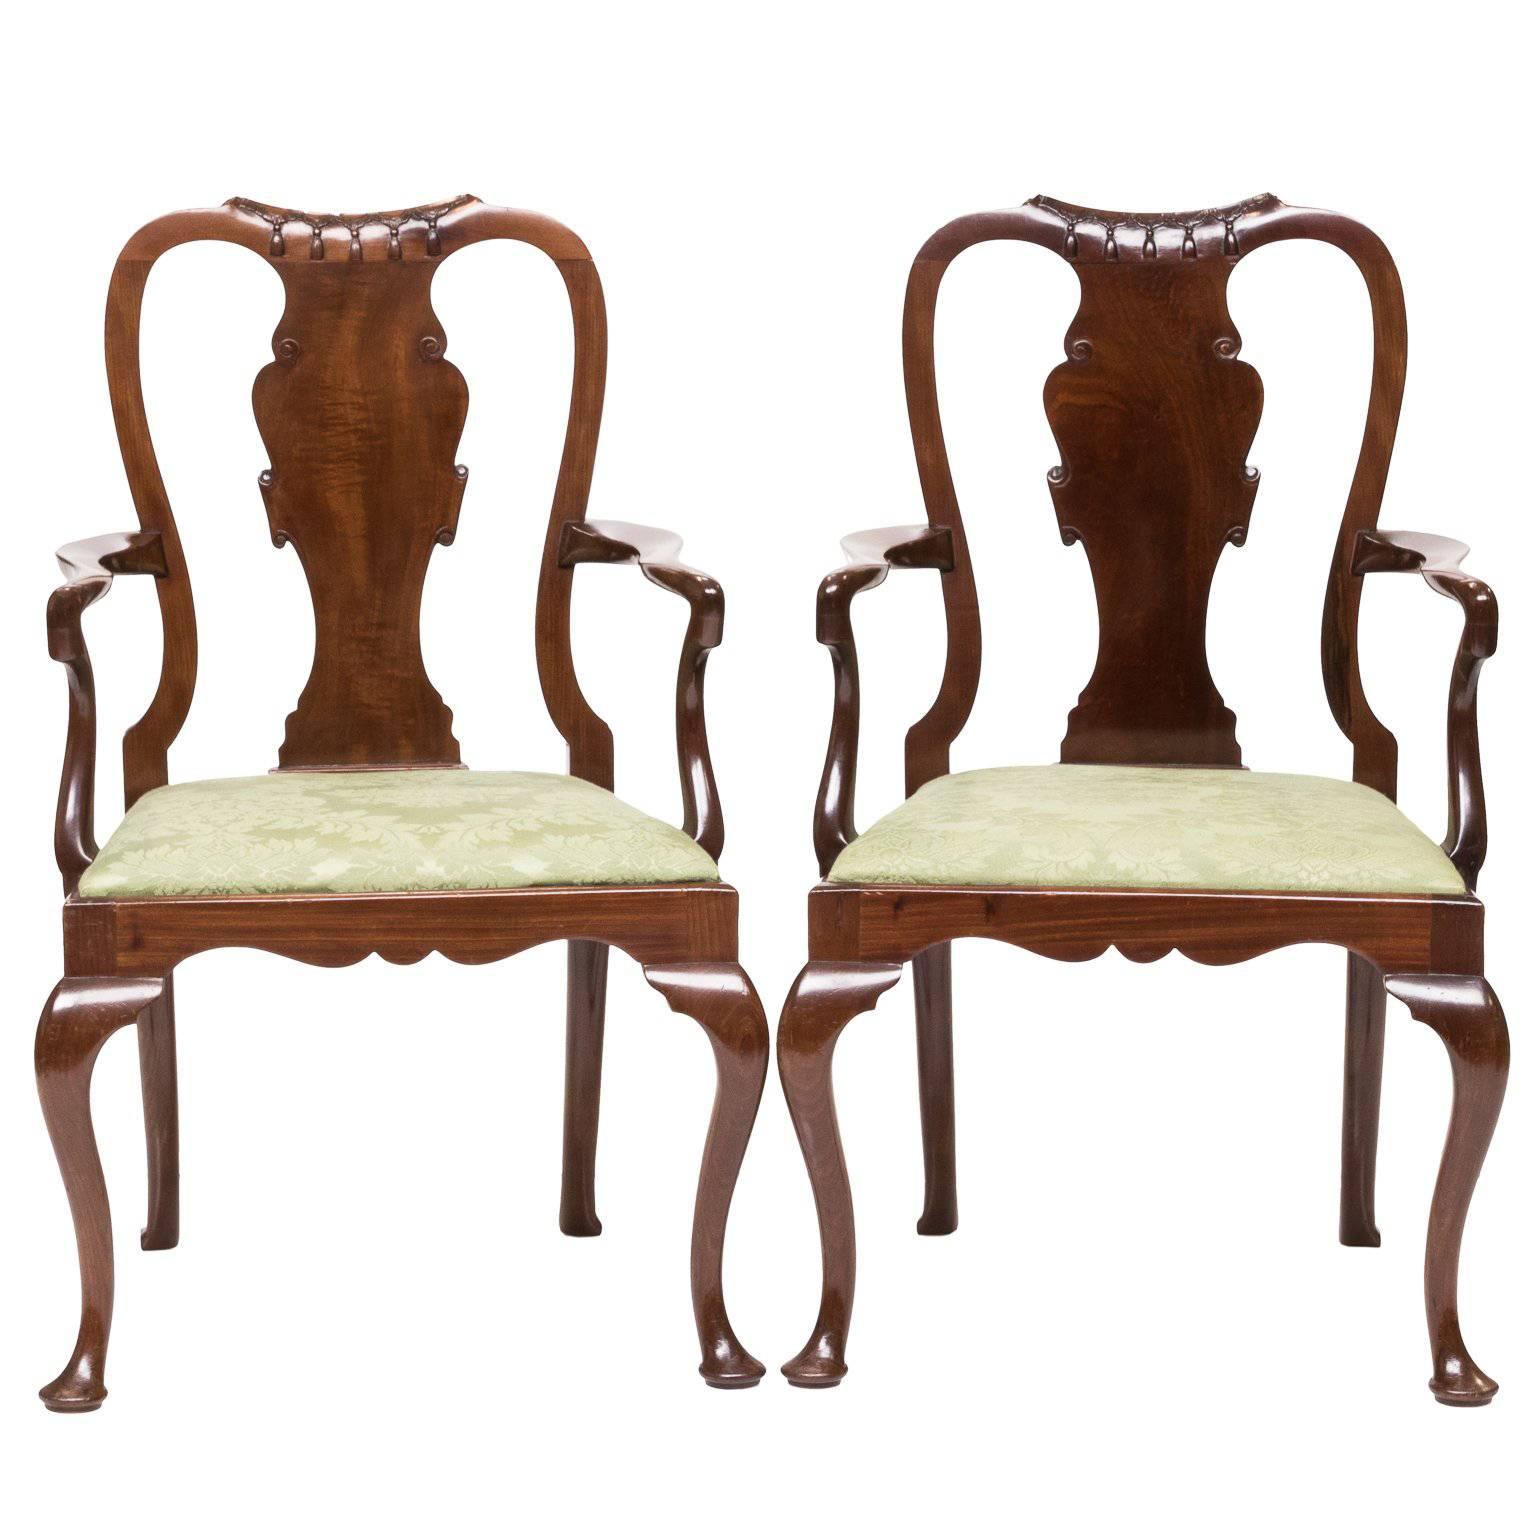 Pair of 19th Century Queen Anne Childs Chairs